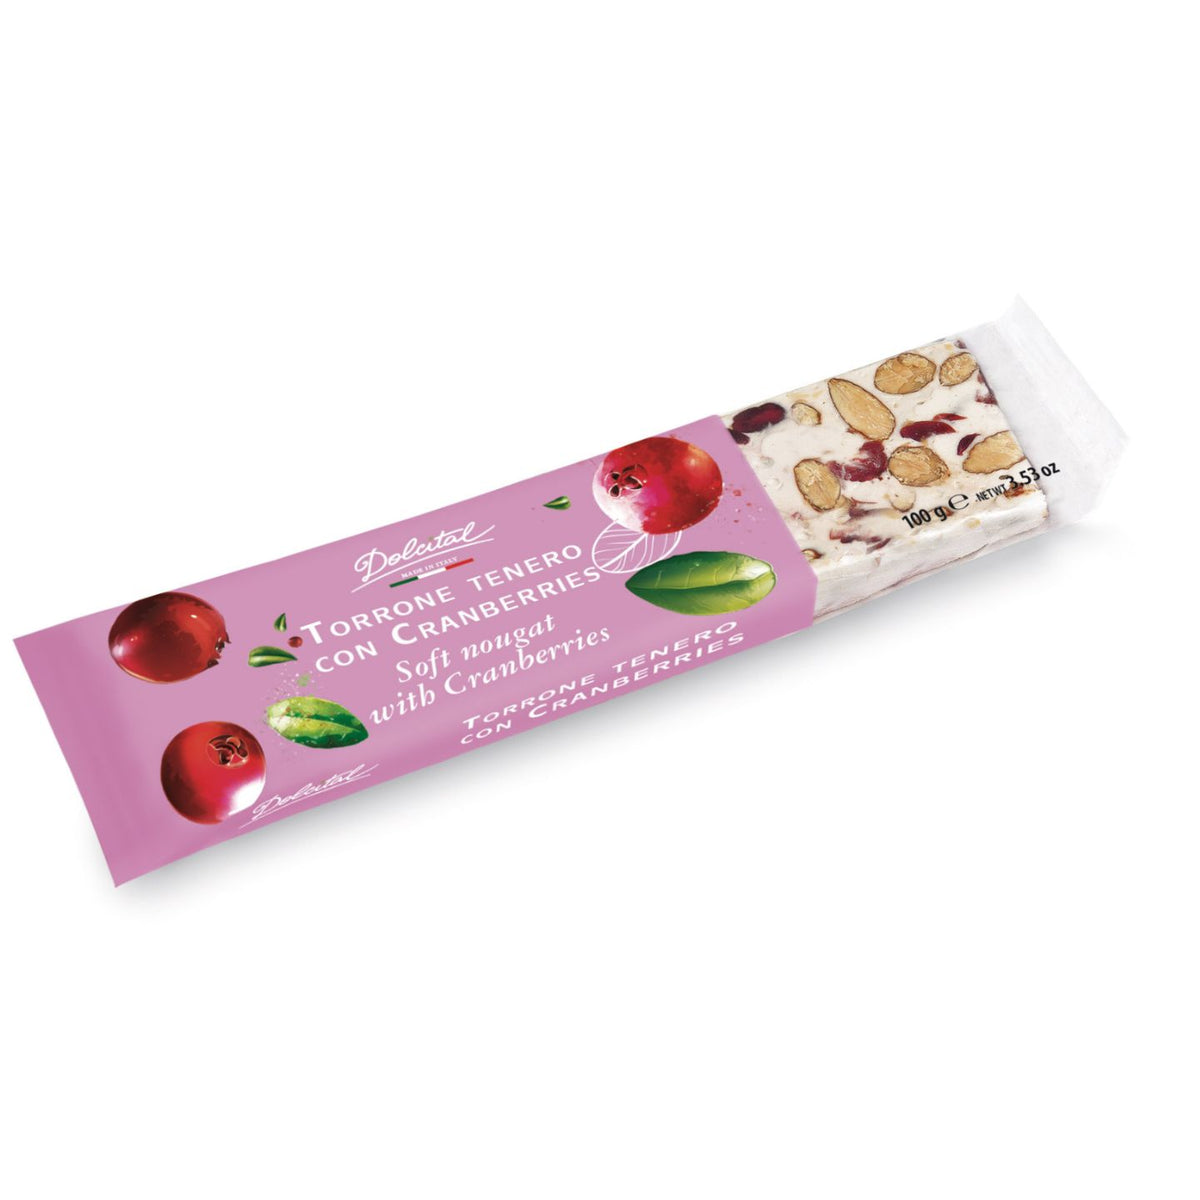 Dolcital Soft Nougat with Cranberries 100g  | Imported and distributed in the UK by Just Gourmet Foods